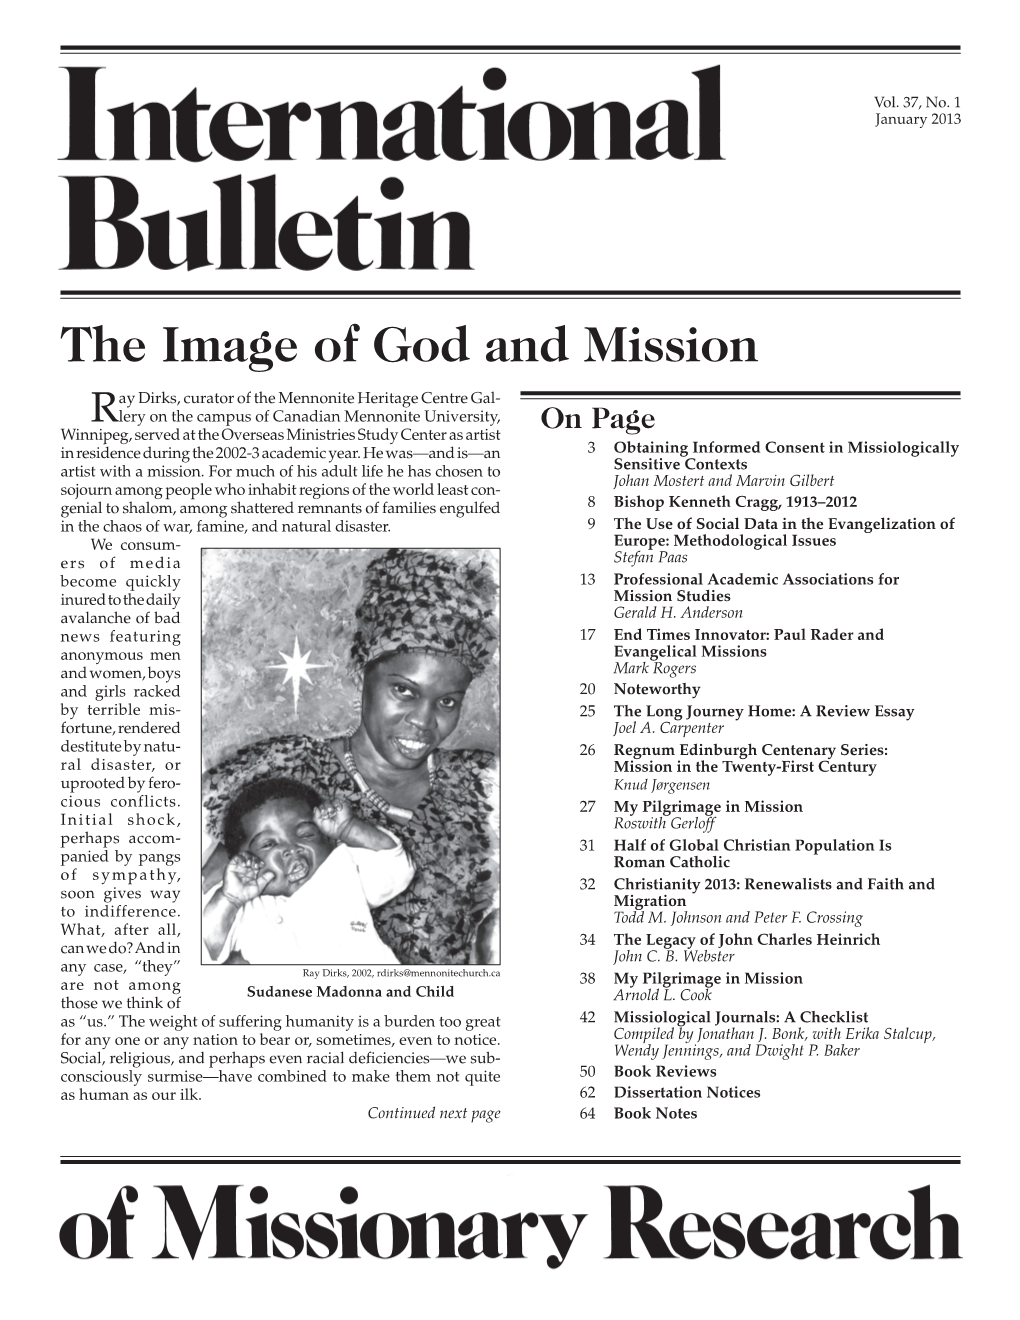 International Bulletin of Missionary Research, Vol 37, No. 1